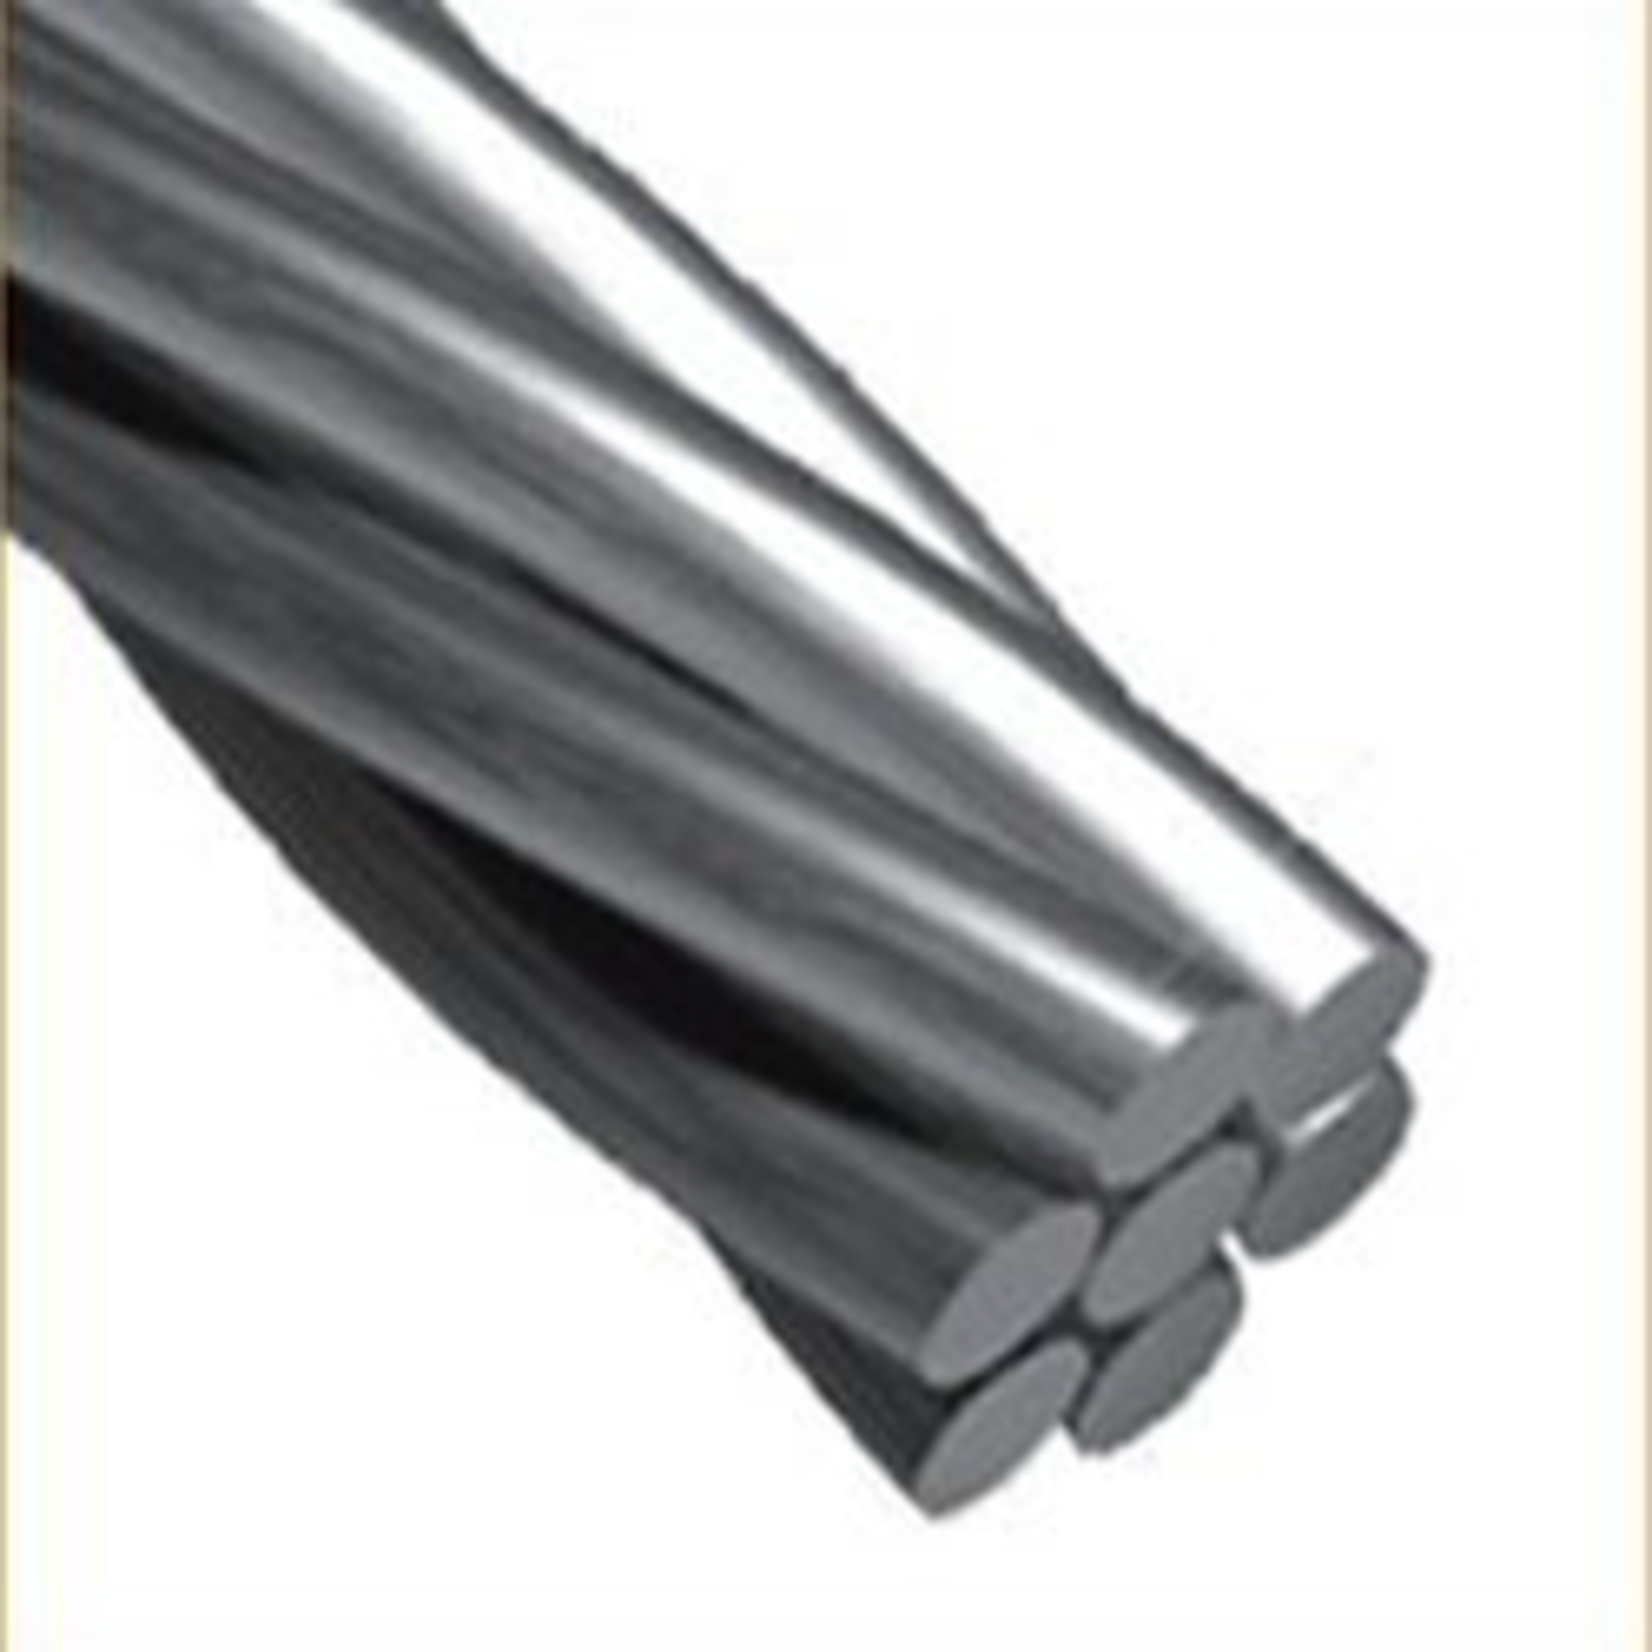 Fehr Bros. Cable Common Grade 1/4" X 250' MBS 1900#